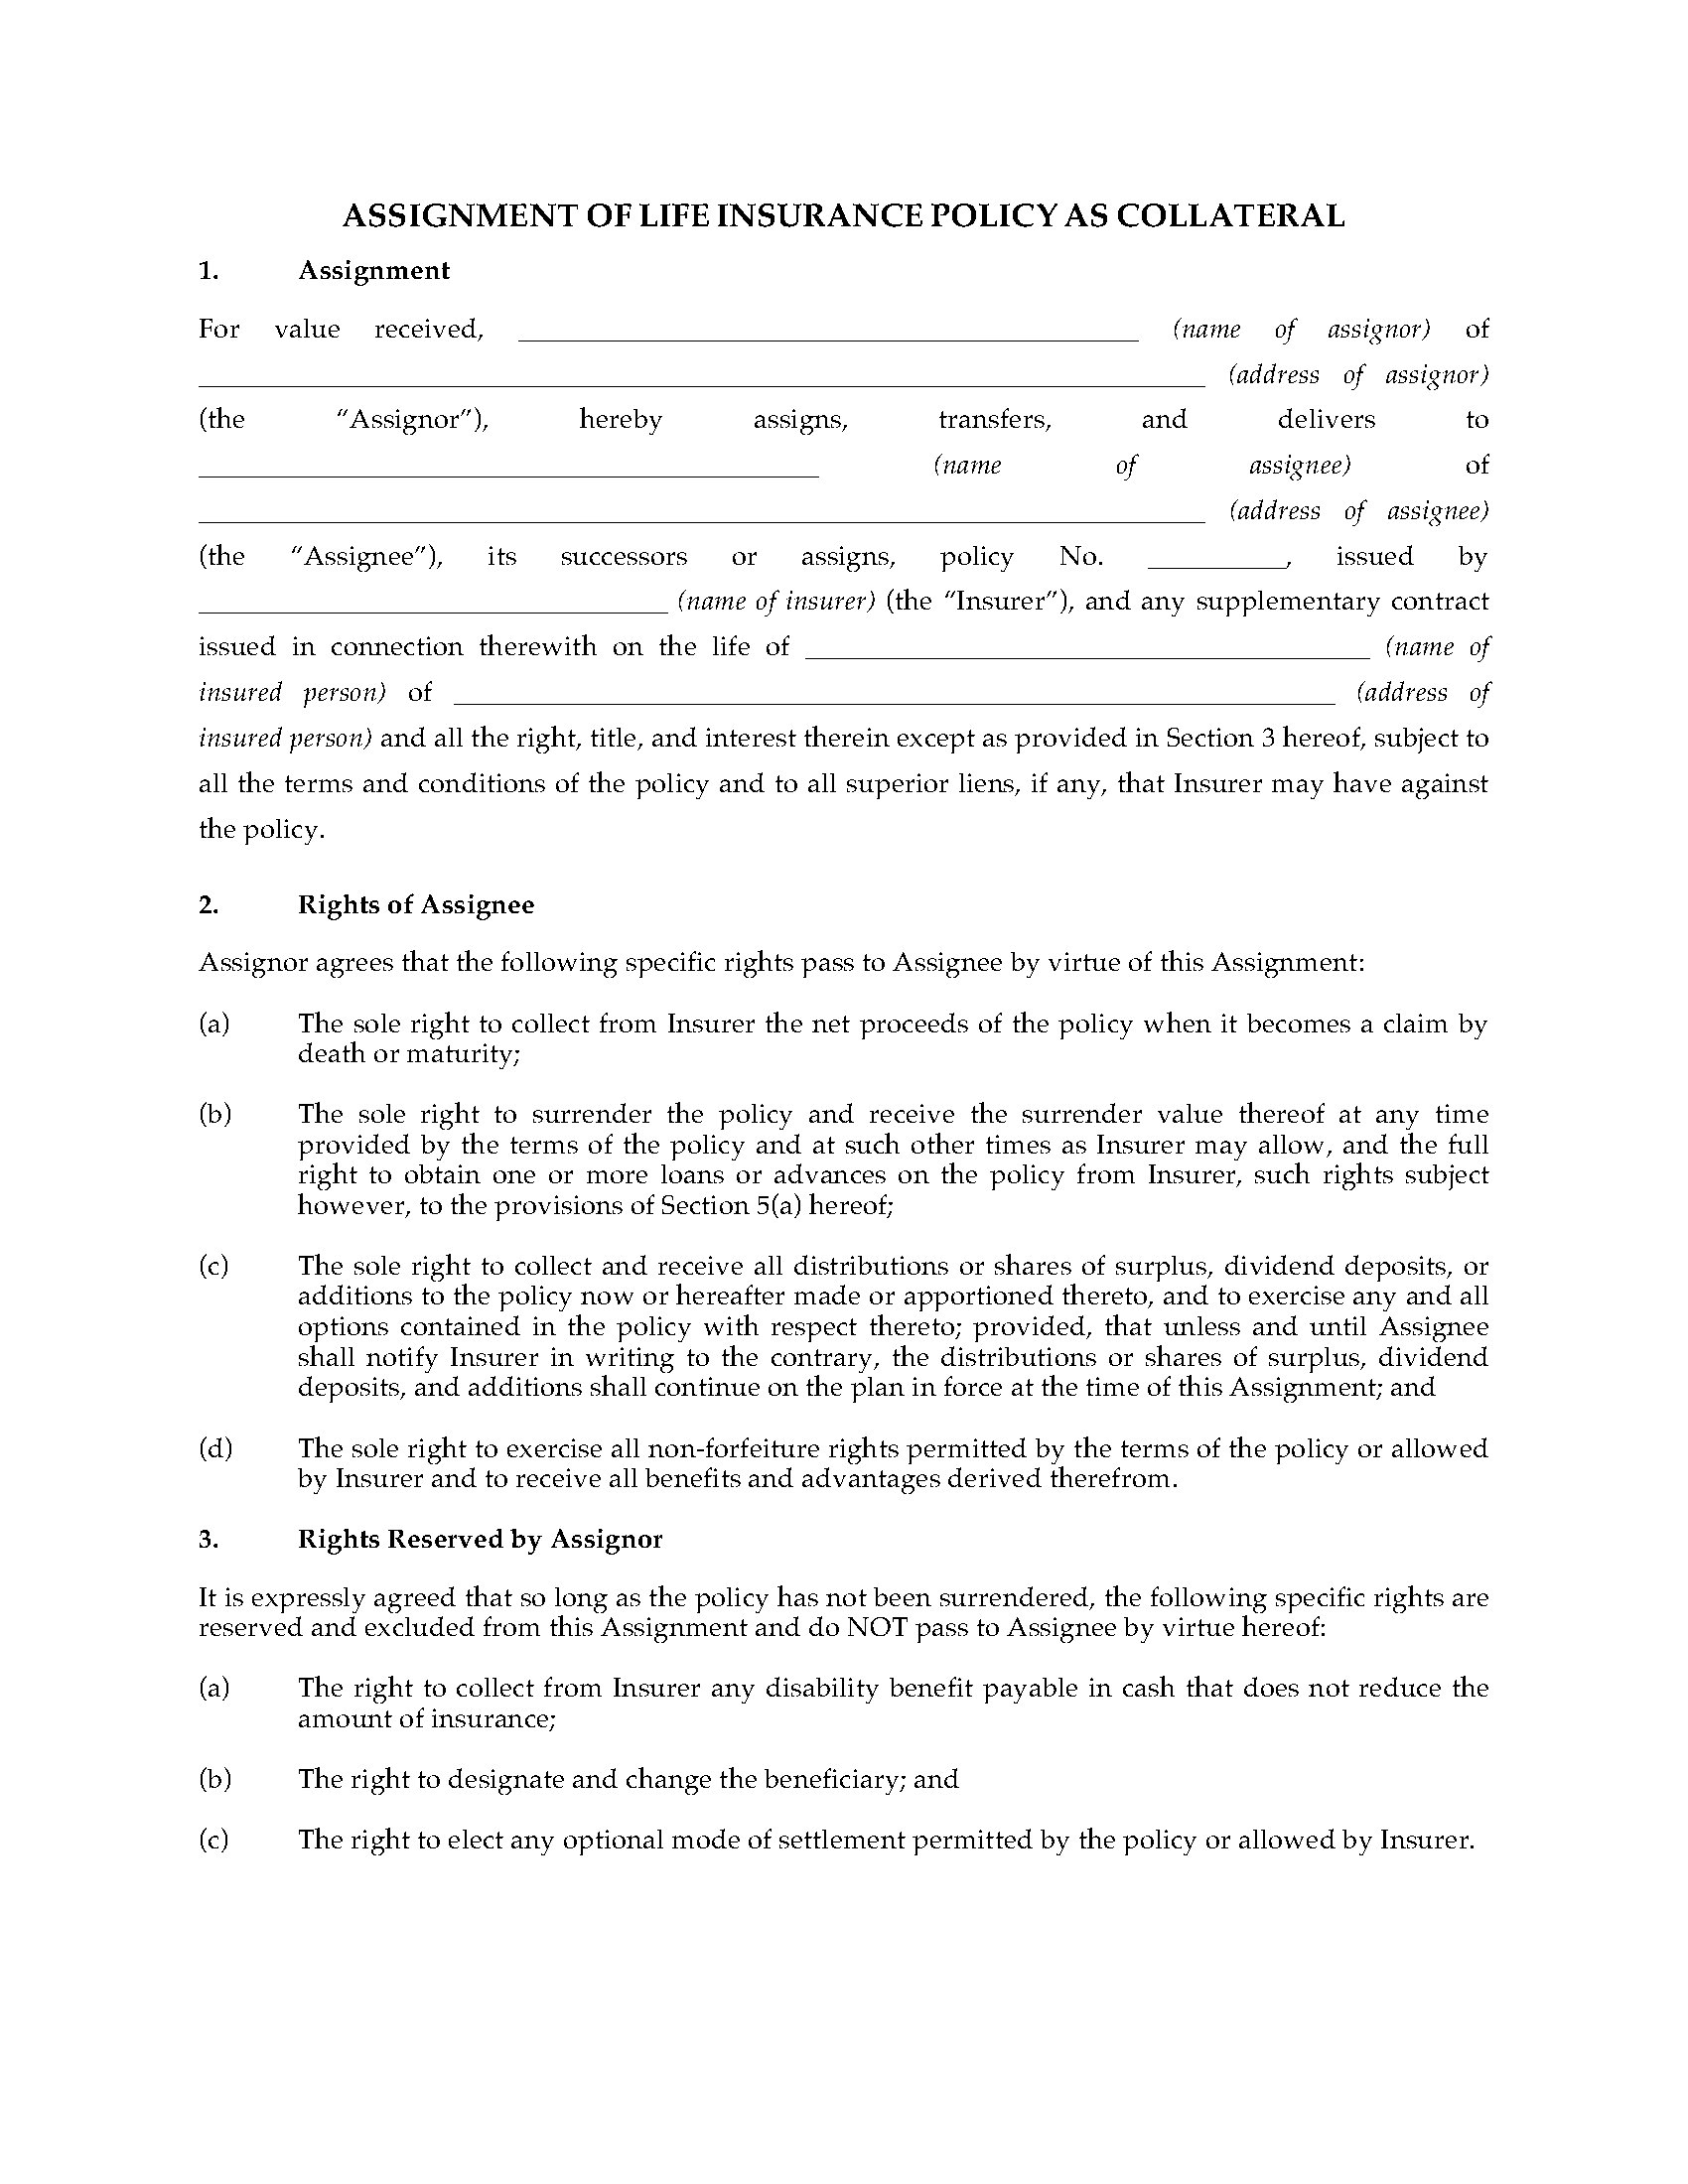 assignment of life insurance form